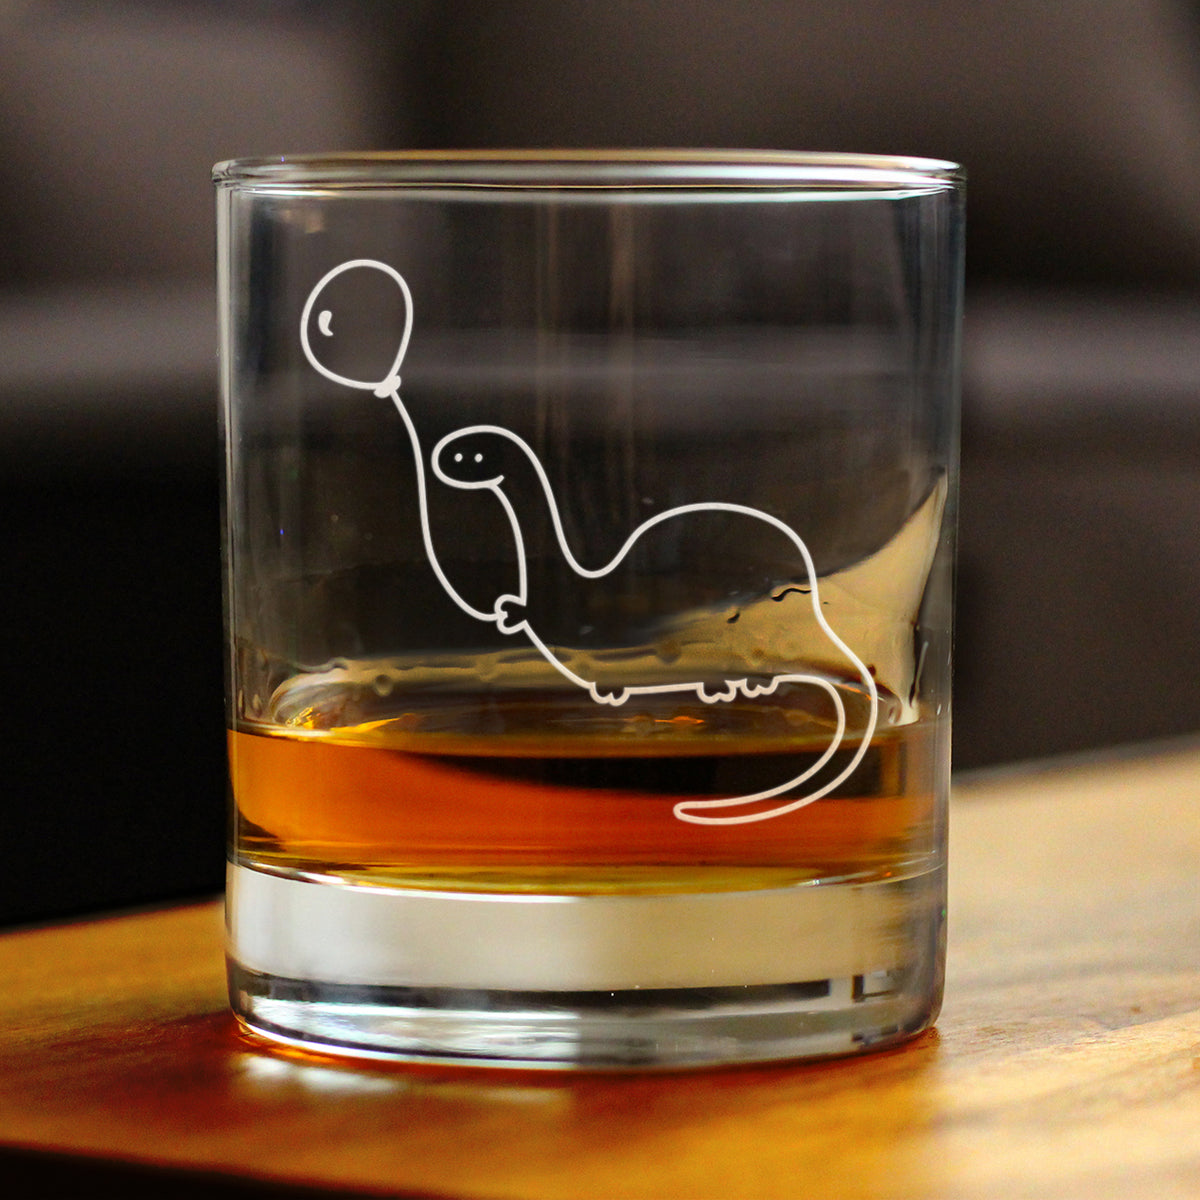 Dinosaur With Birthday Balloon - Whiskey Rocks Glass - Cute Funny Dino Themed Gifts and Decor for Dinosaur Lovers - 10.25 Oz Glass